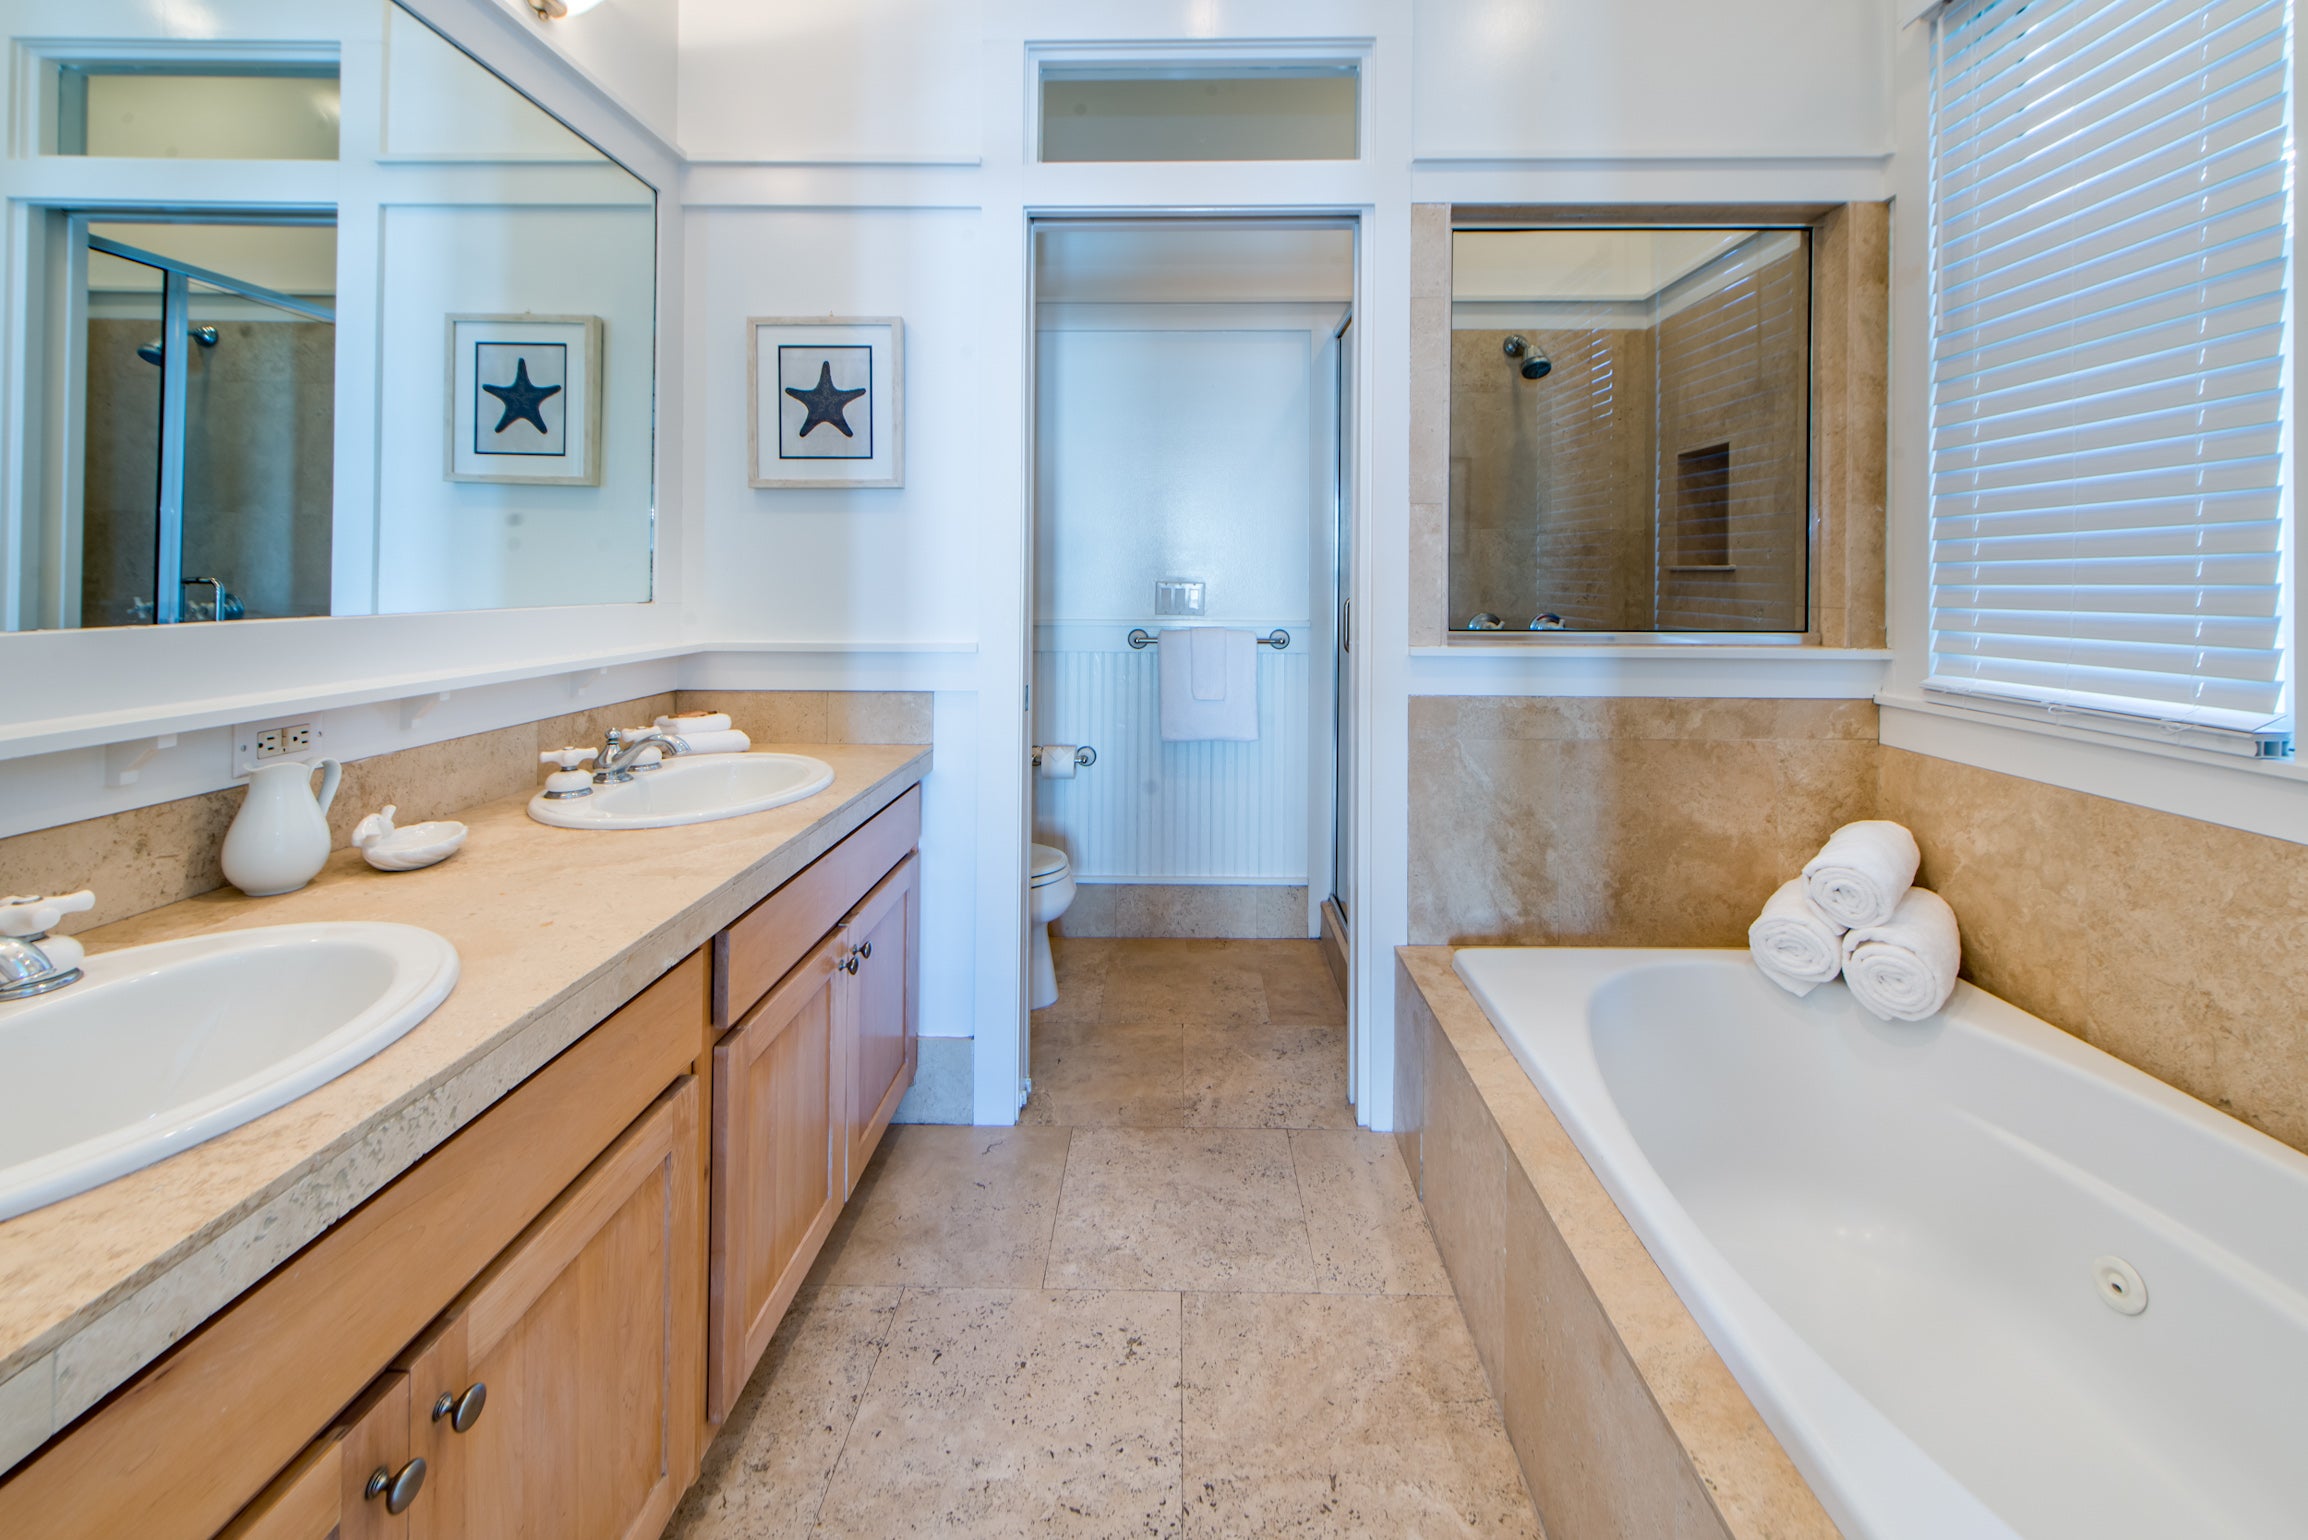 Jetted tub, dual sinks and walk-in shower